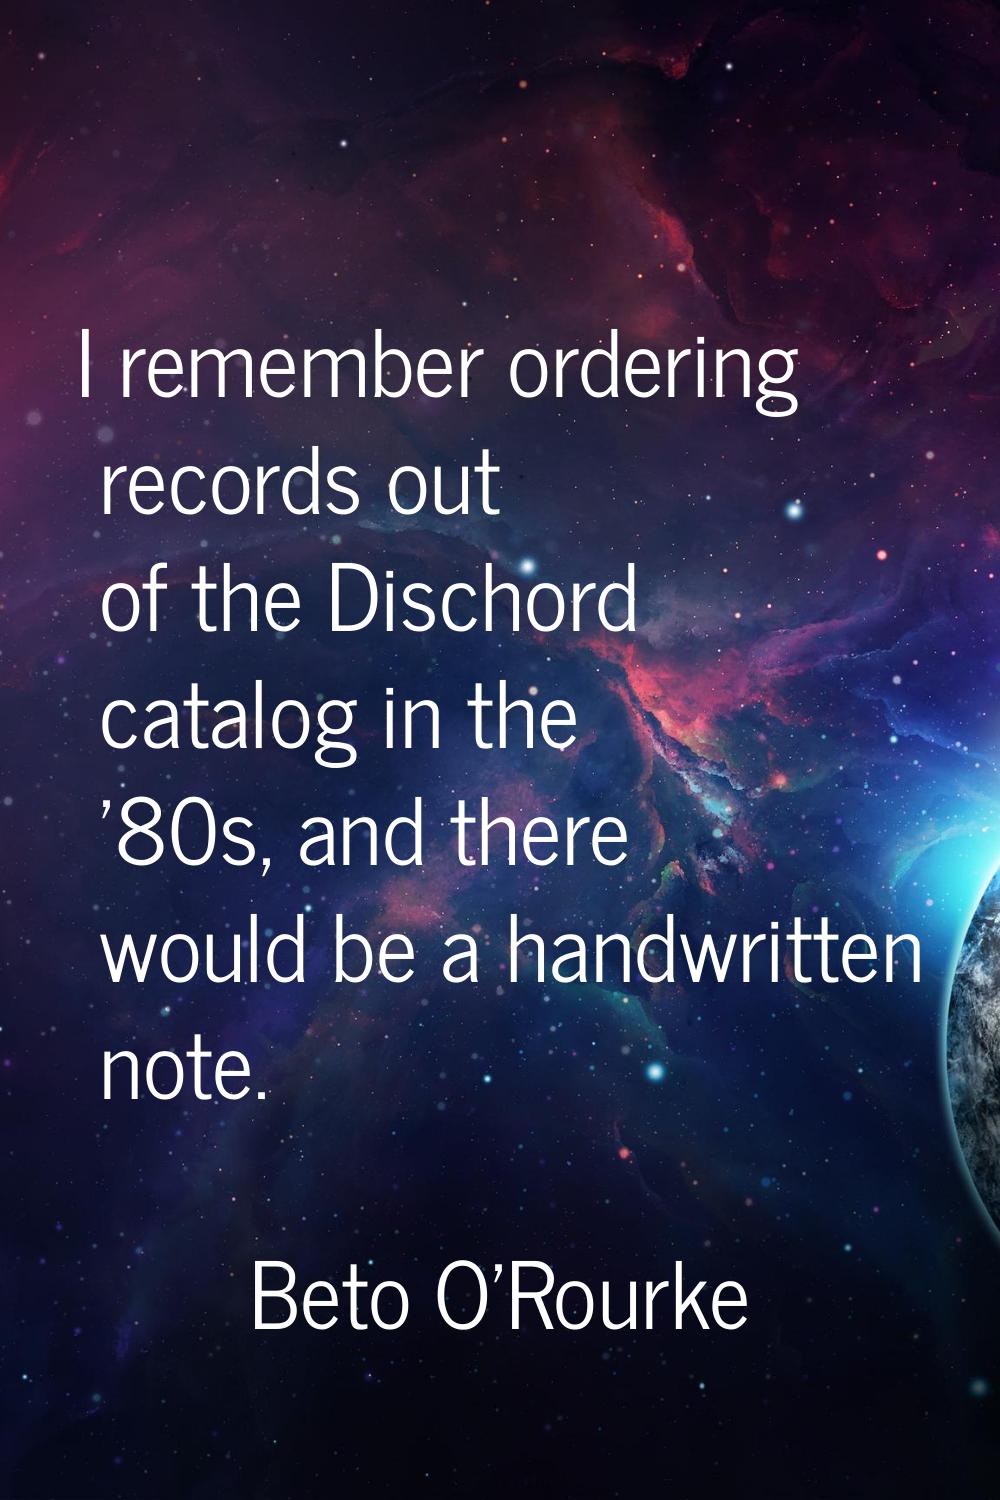 I remember ordering records out of the Dischord catalog in the '80s, and there would be a handwritt